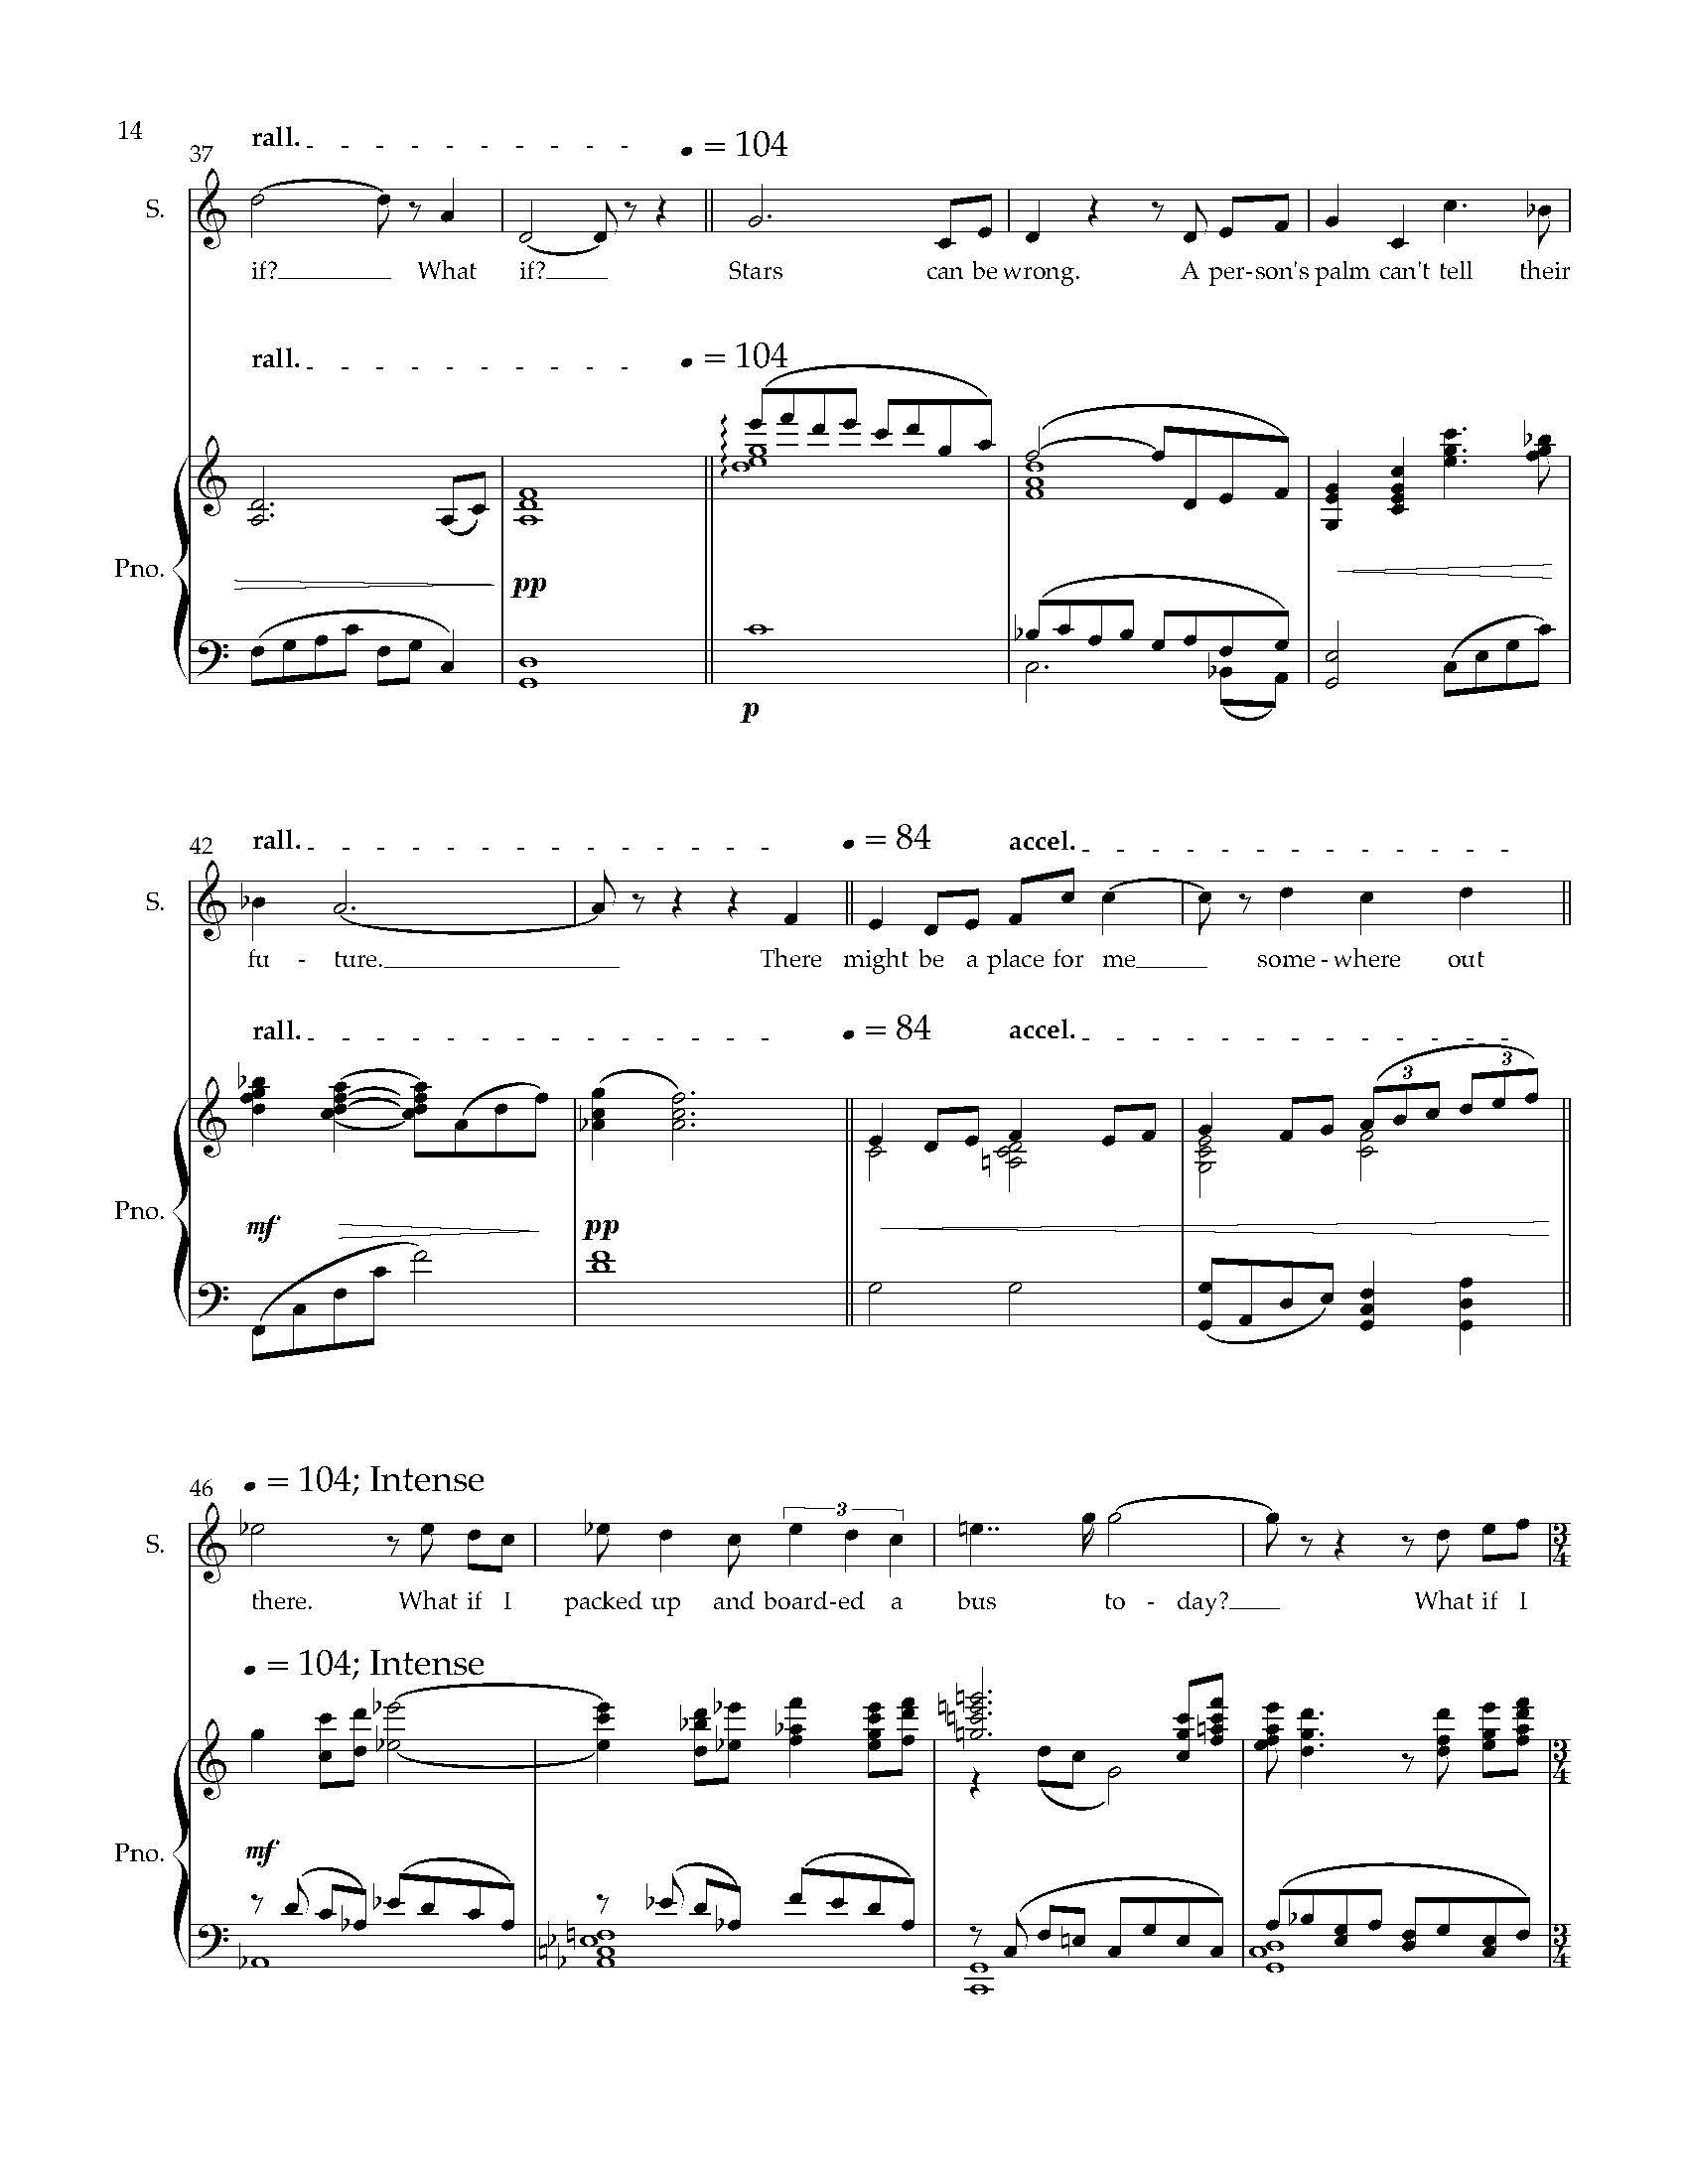 Five Arias from HWGS - Complete Score (1)_Page_18.jpg